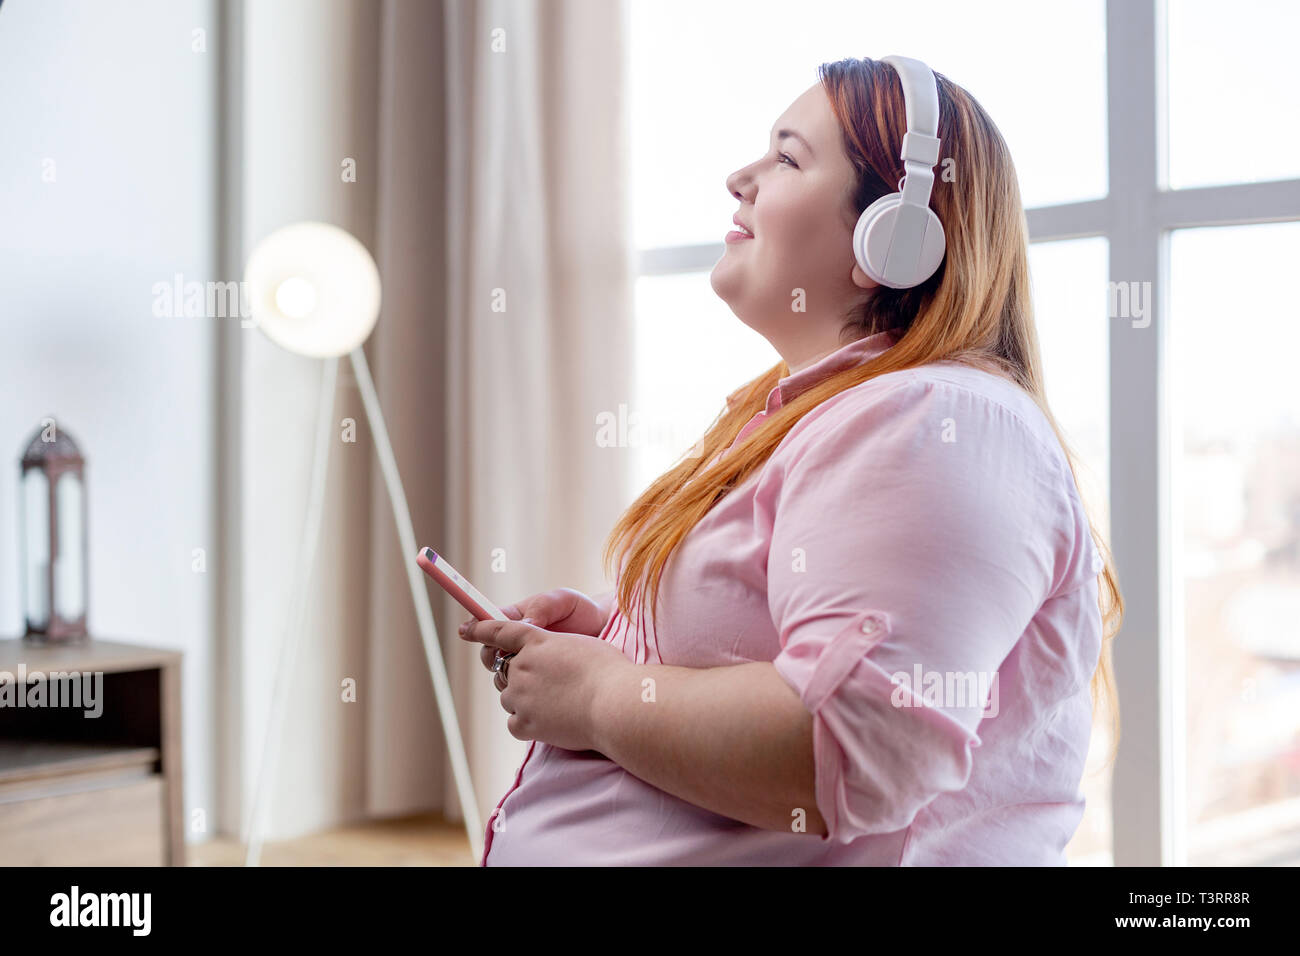 Delighted nice woman enjoying her favourite music Stock Photo